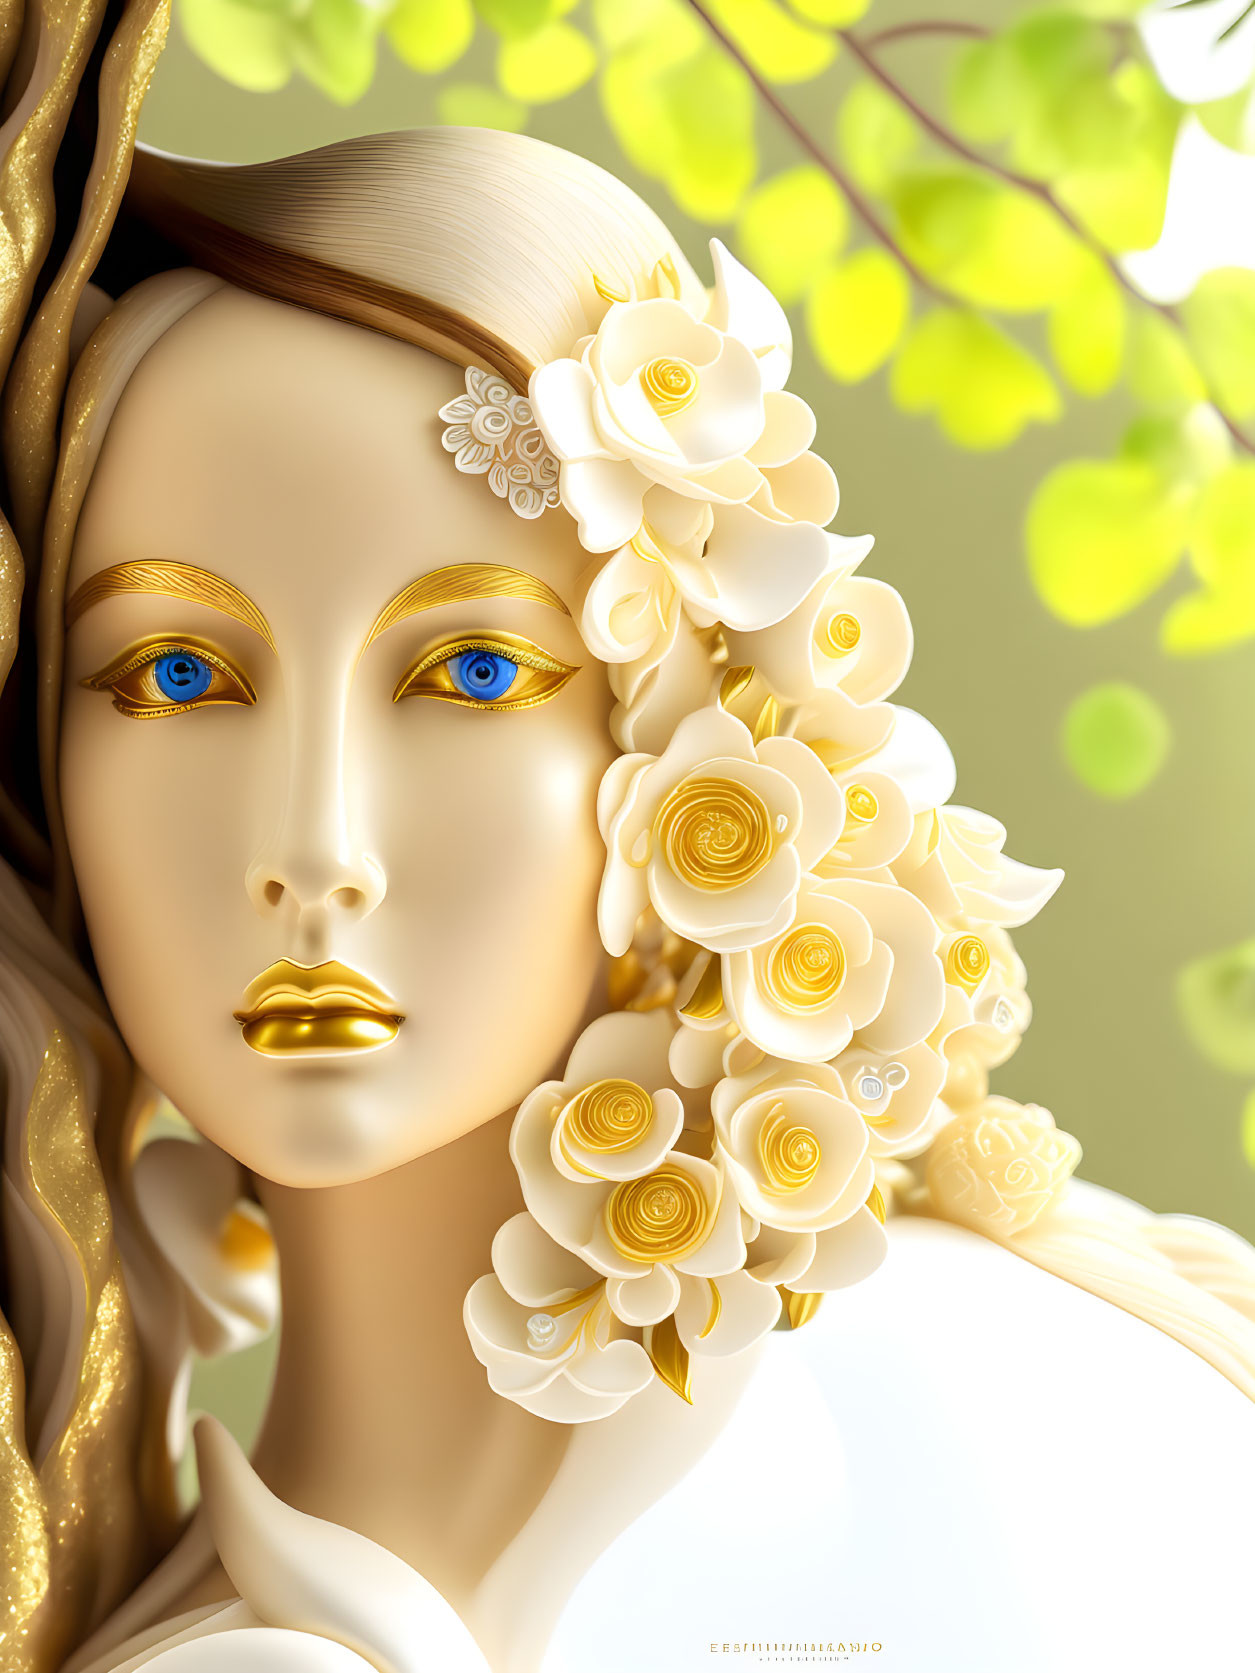 Surreal portrait: female figure with golden lips, blue eyes, white roses, soft green backdrop